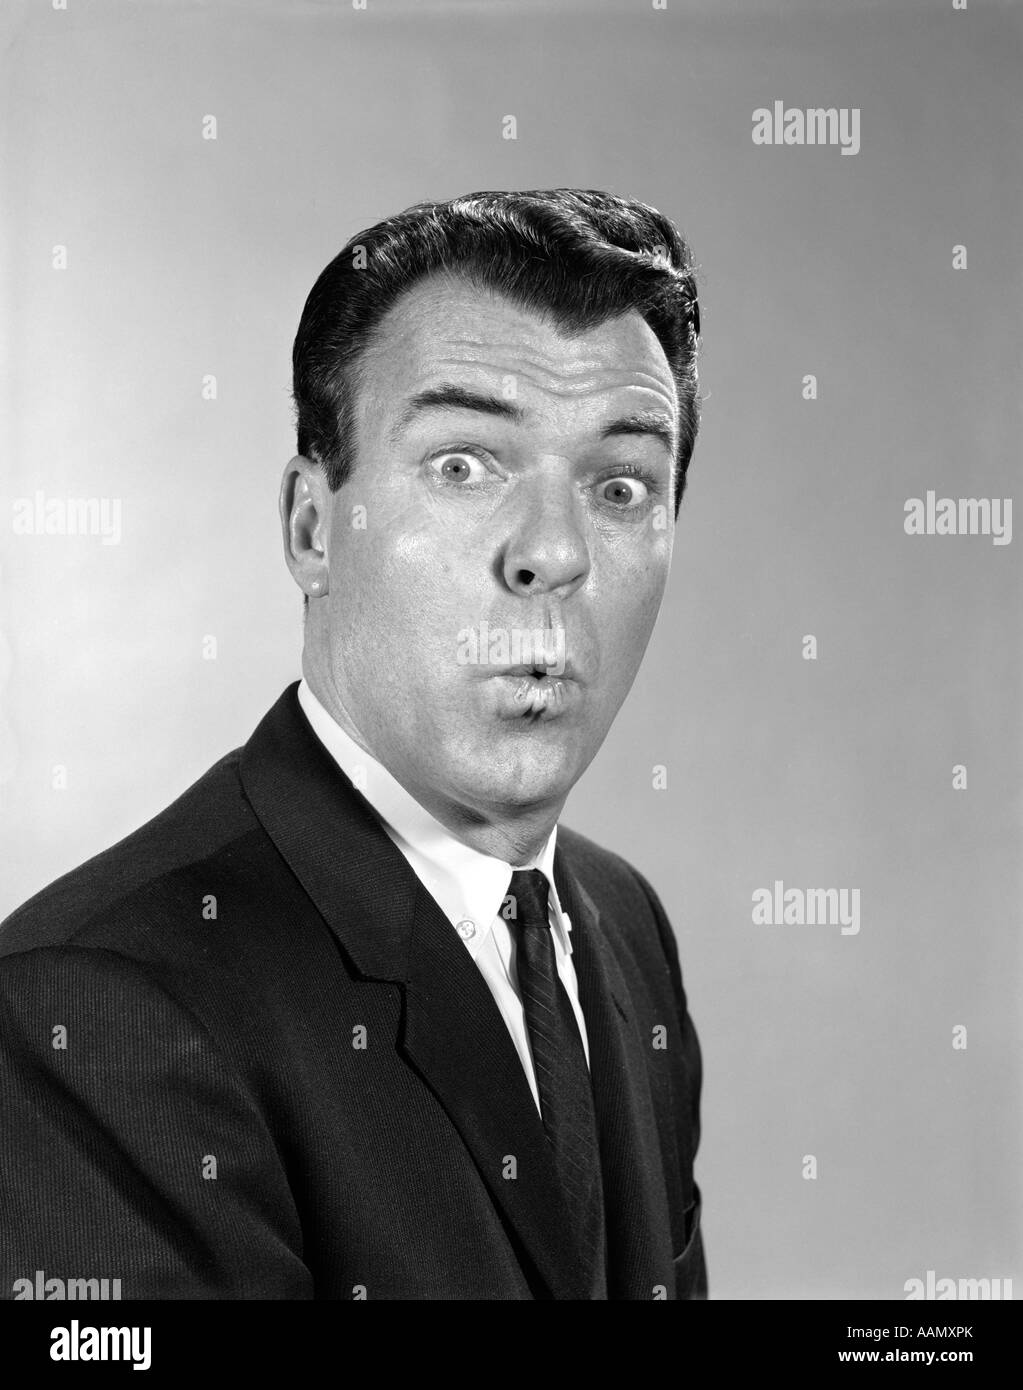 1960s MAN SUIT TIE MAKING FUNNY FACE FACIAL EXPRESSION LIPS PURSED EYES WIDE Stock Photo